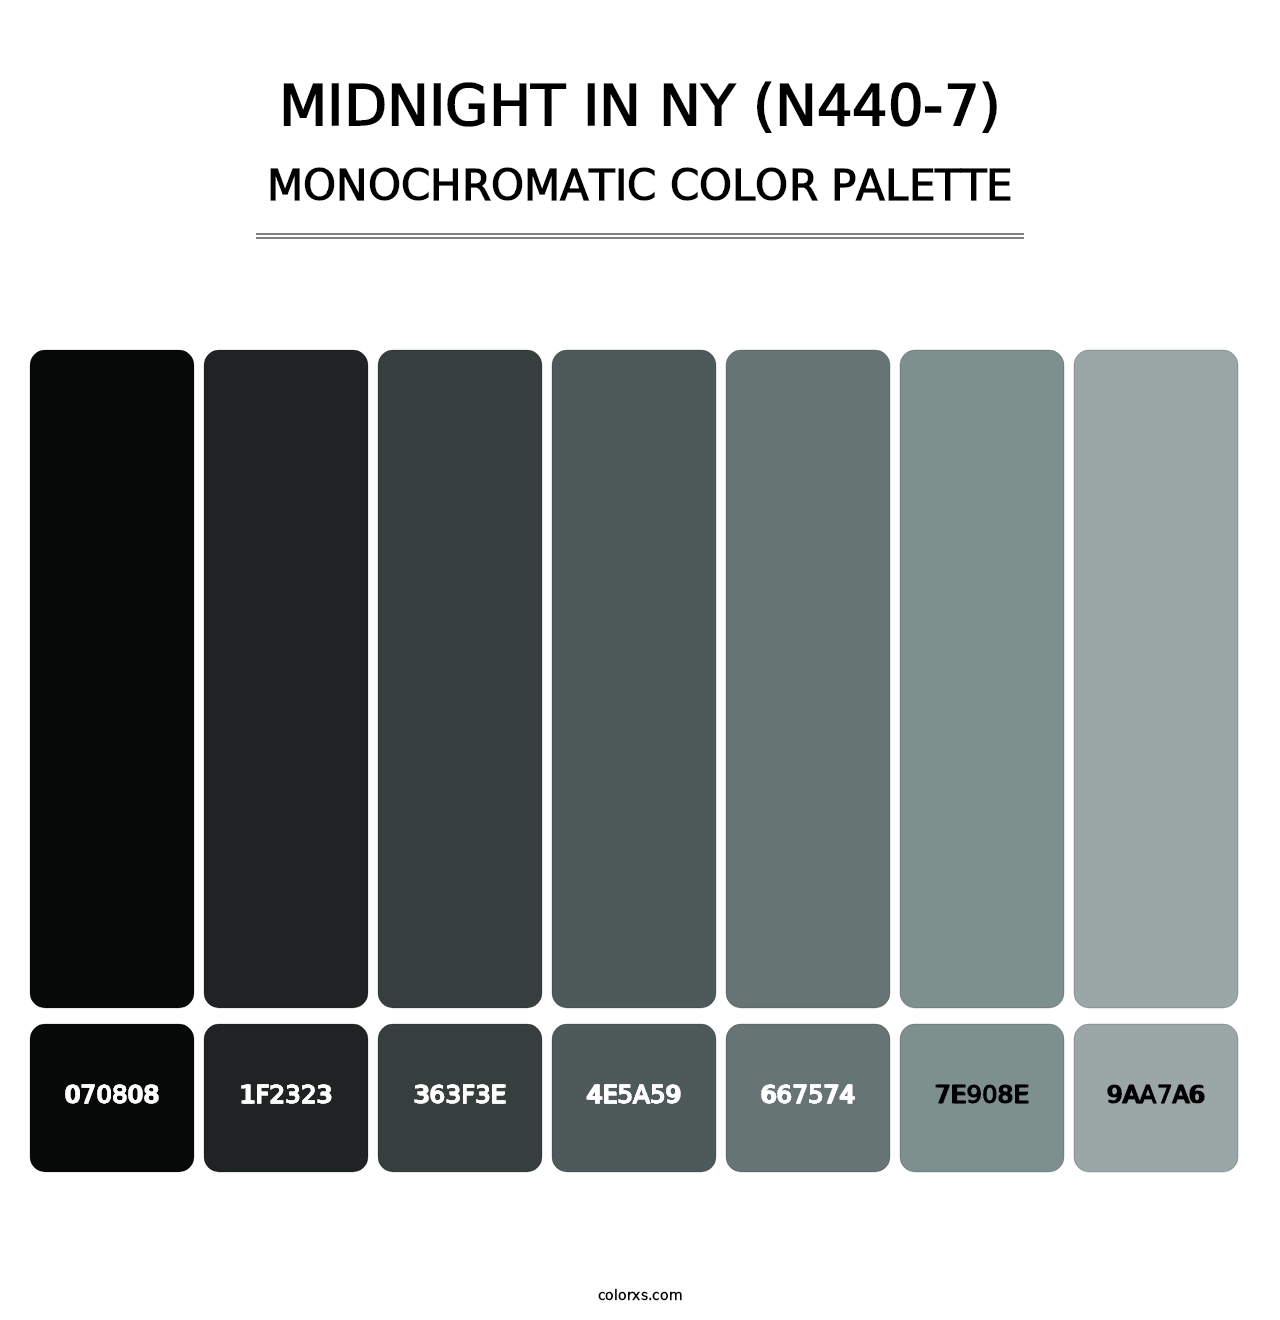 Midnight In Ny (N440-7) - Monochromatic Color Palette